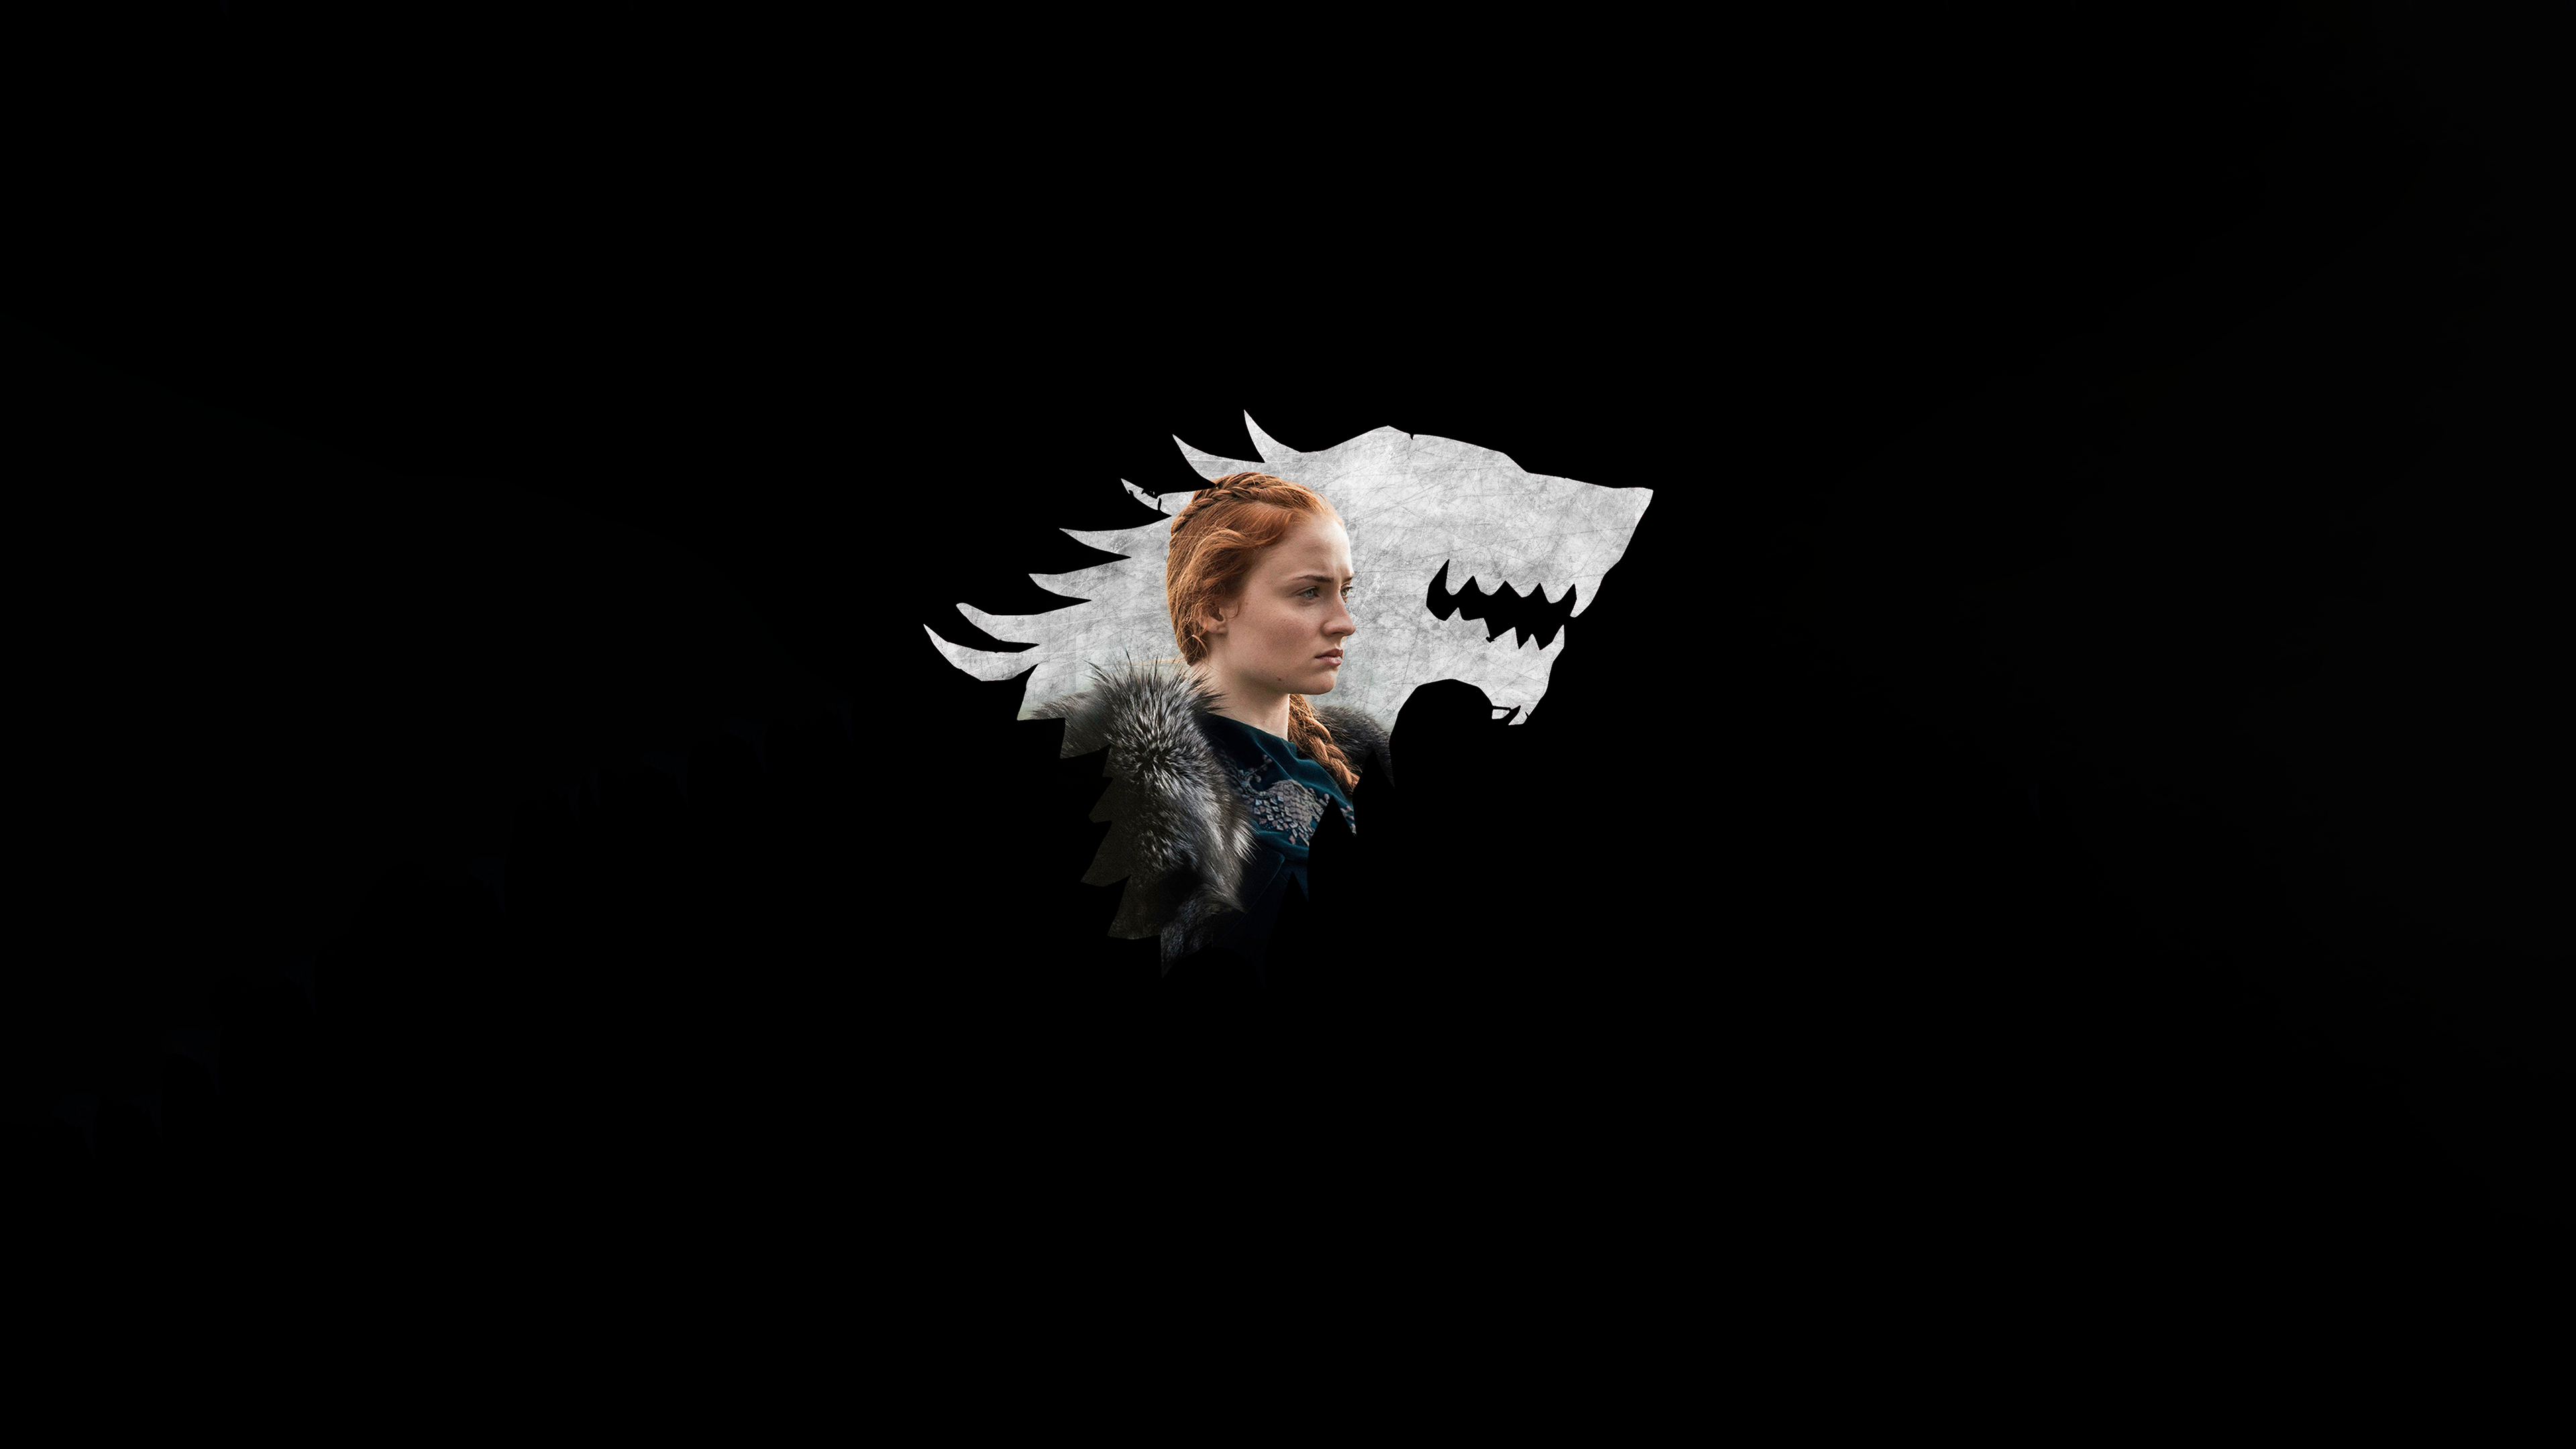 General 3840x2160 minimalism simple background black background Sansa Stark A Song of Ice and Fire Game of Thrones actress TV series